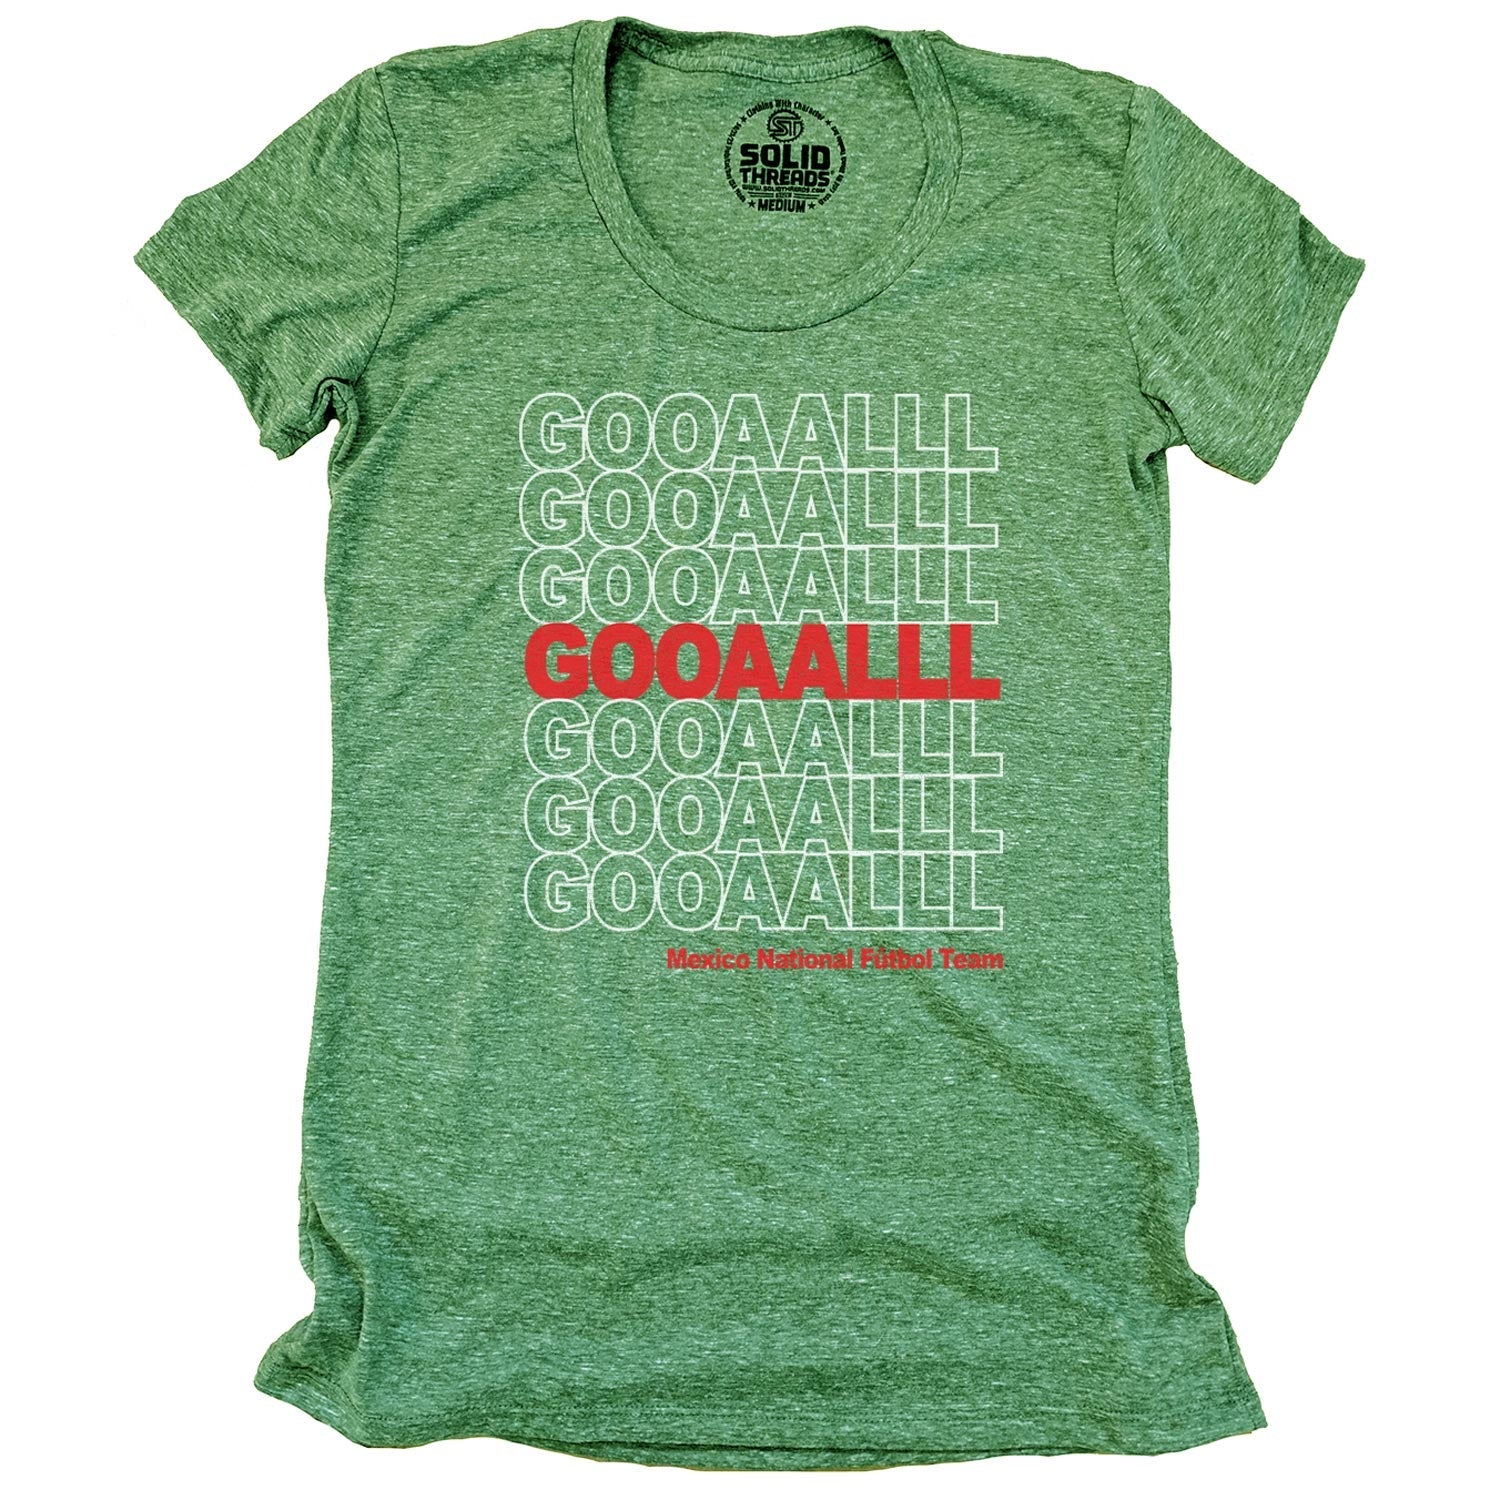 Women's Mexico Soccer Gooaalll Vintage Graphic Tee | Cool World Cup Football T-Shirt | SOLID THREADS